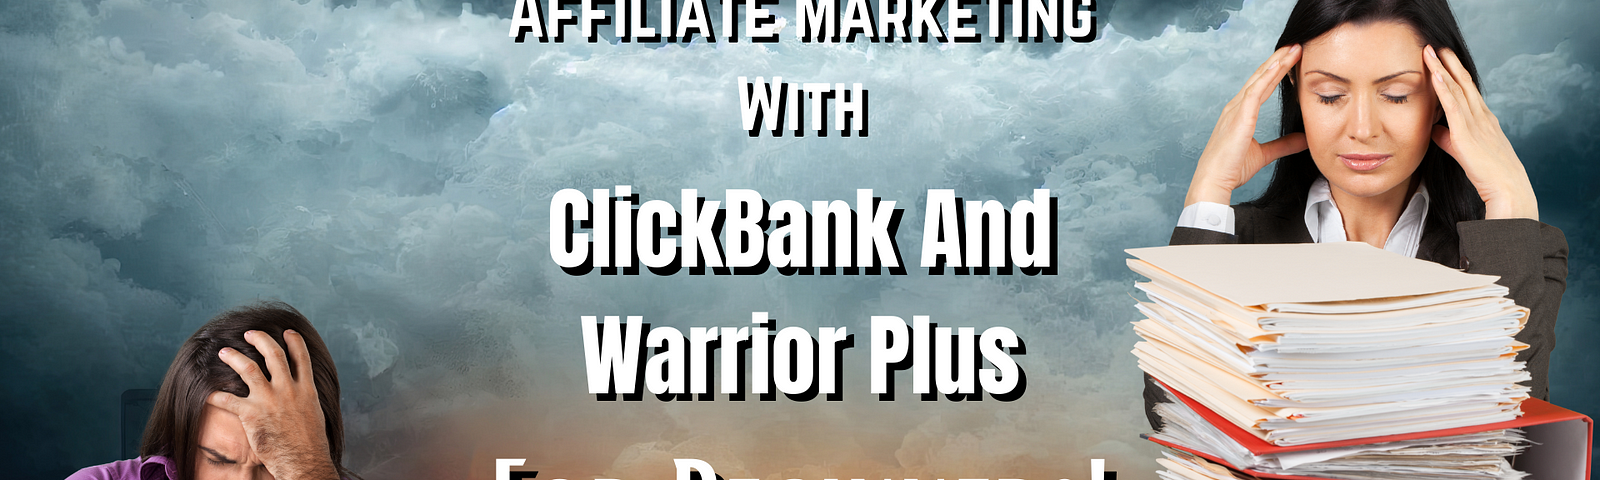 clickbank affiliate marketing and warrior plus sales